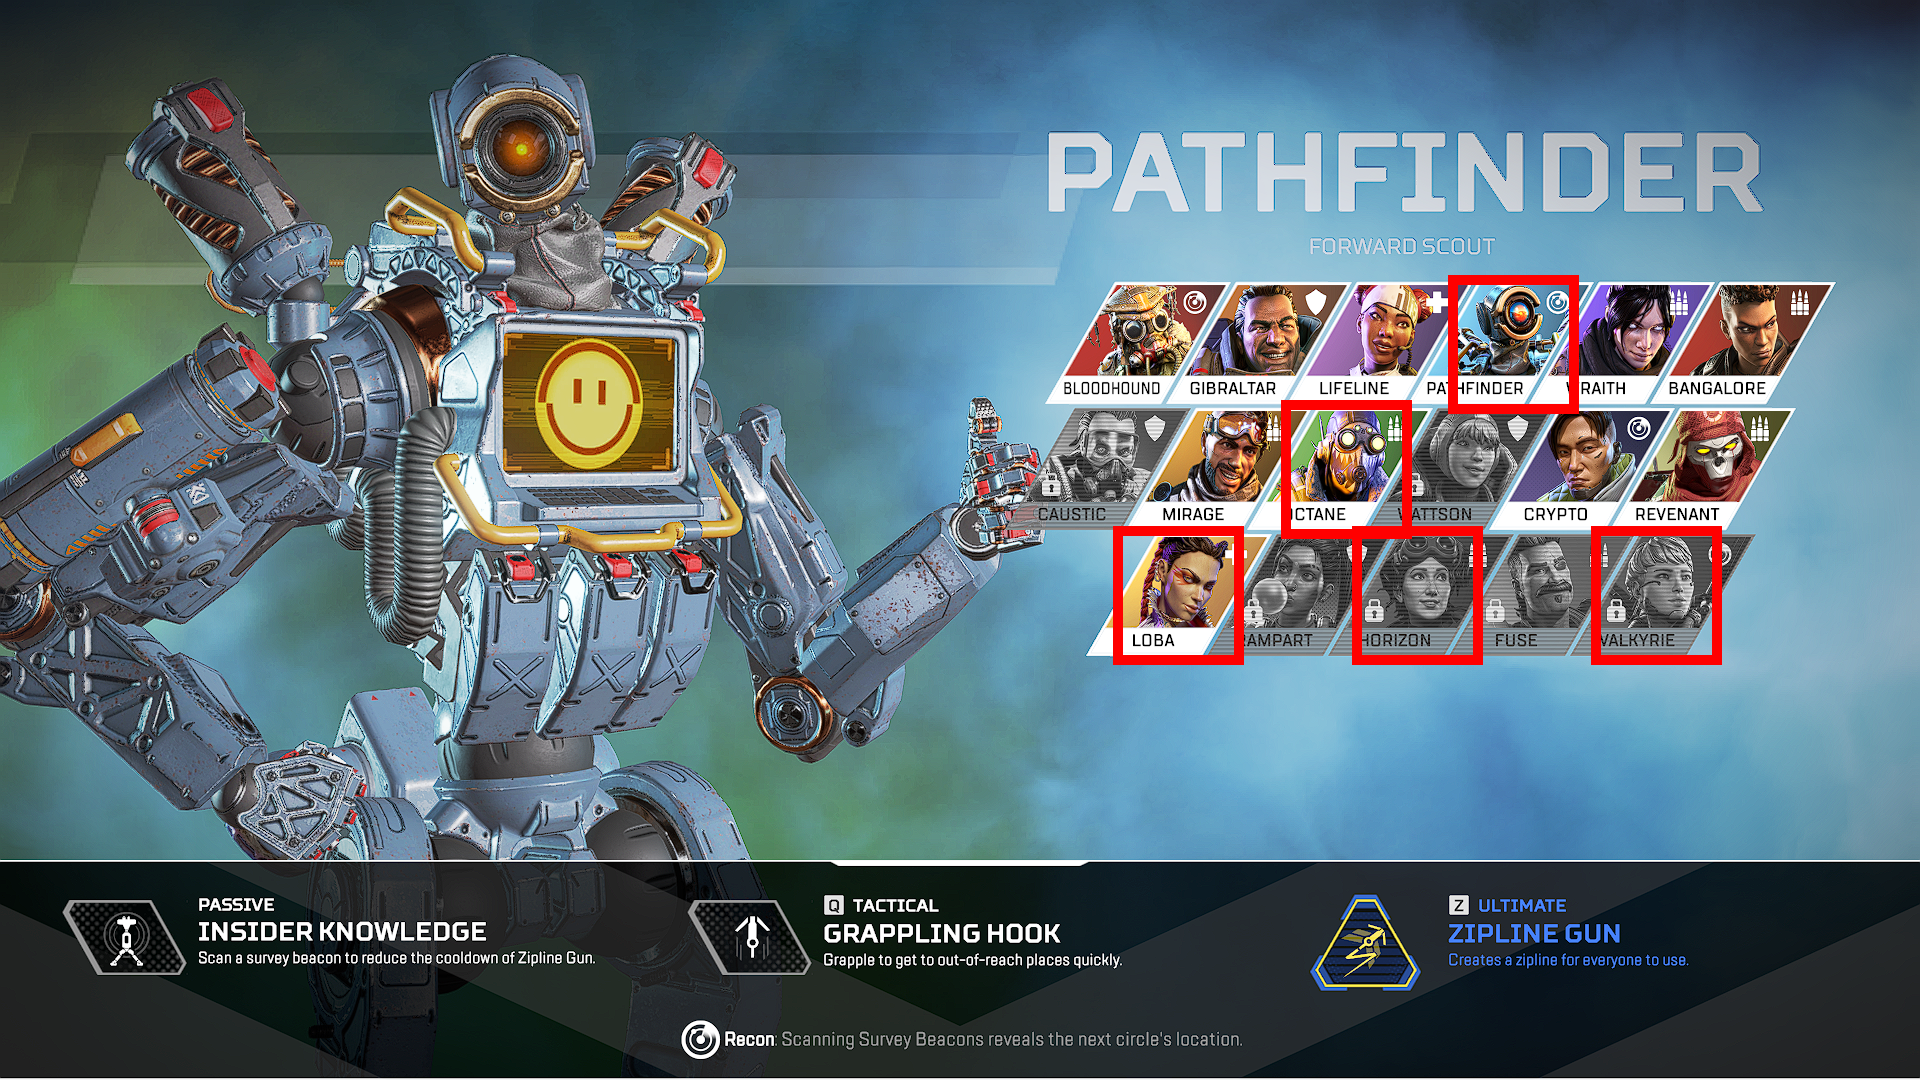 How To Turn On Bots In Apex Legends